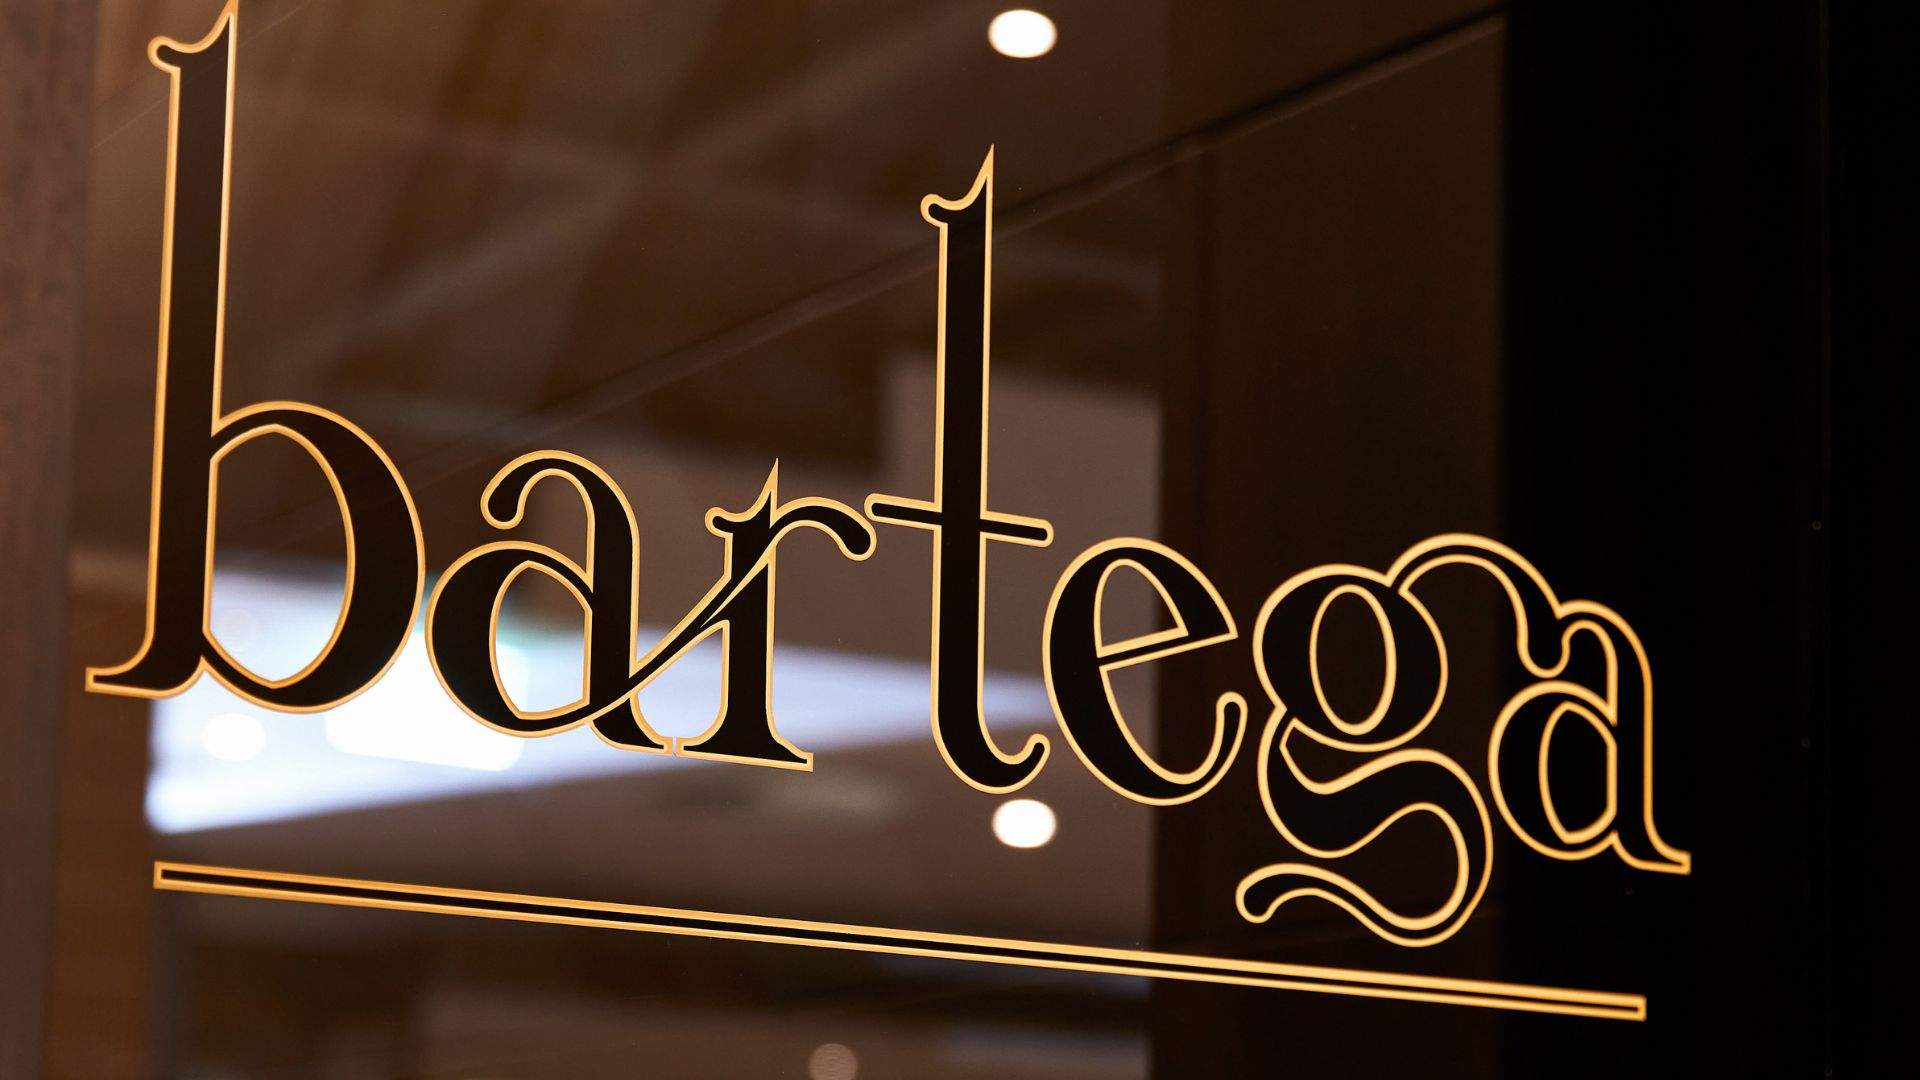 Bartega Is the Canterbury Leagues Club's Luxe New Bar as Part of Its Multimillion Dollar Revamp